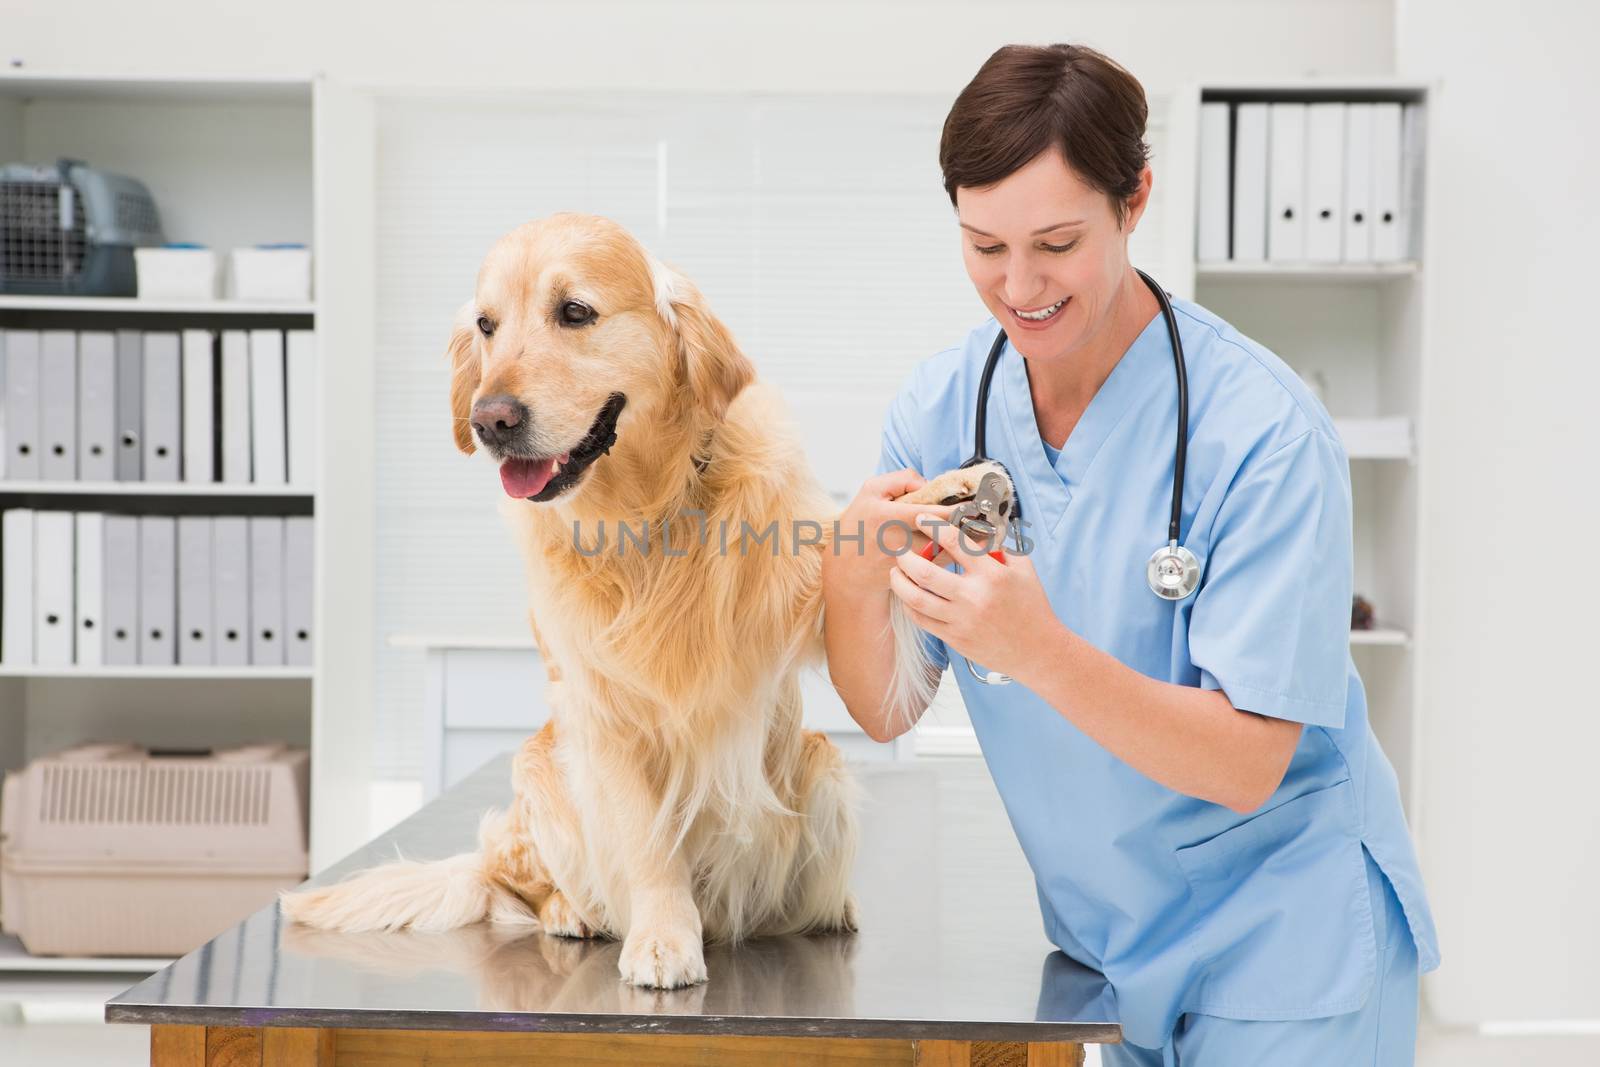 Vet using nail clipper on a dog in medical office